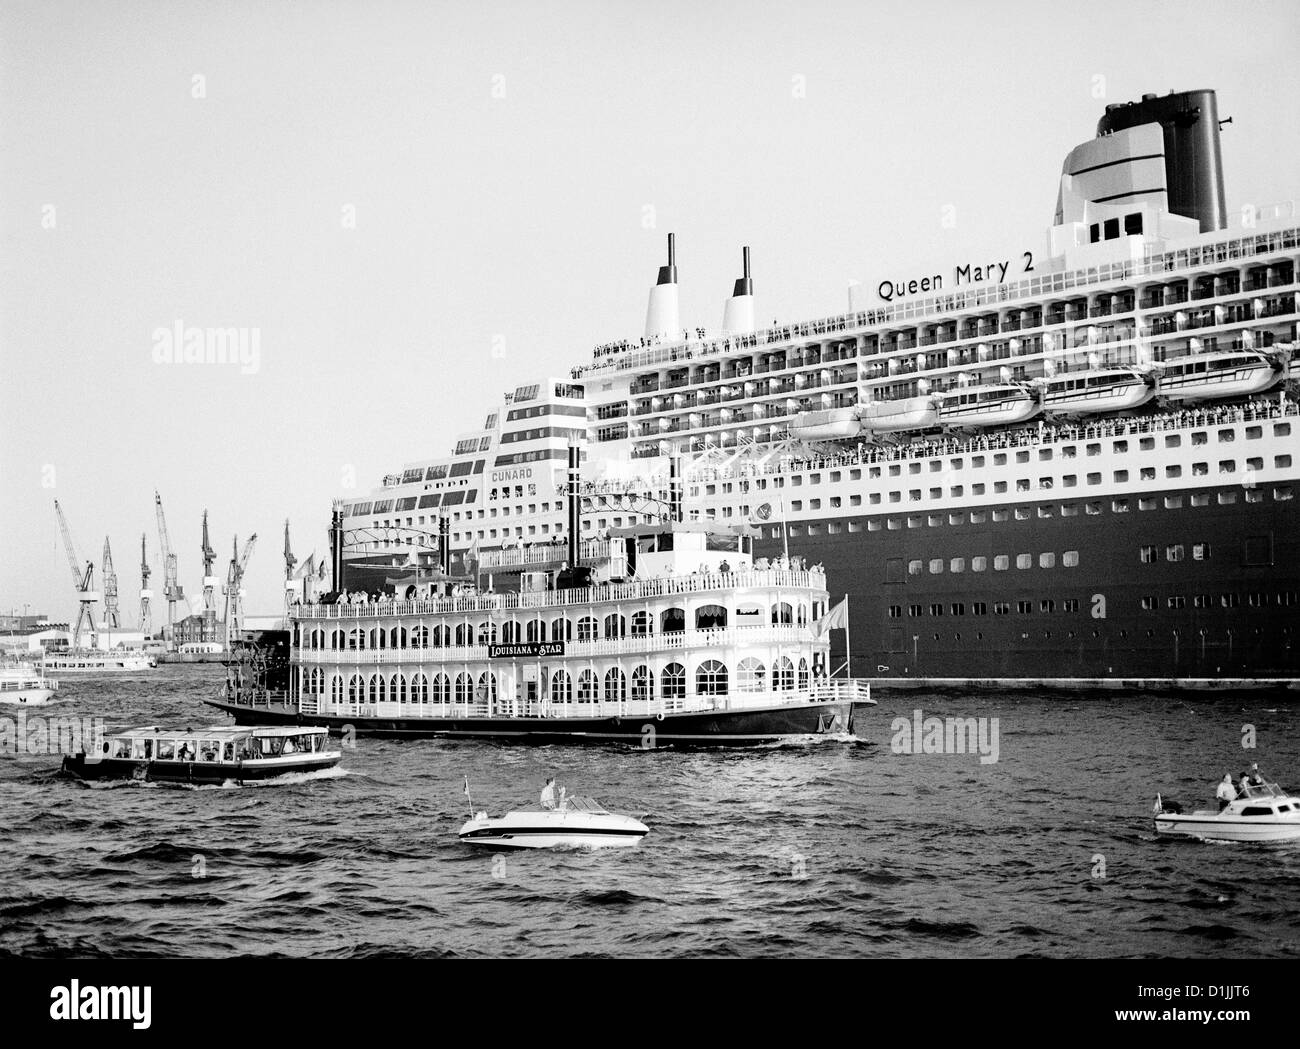 Cunard's Queen Mary 2 departing from the port of Hamburg. Stock Photo